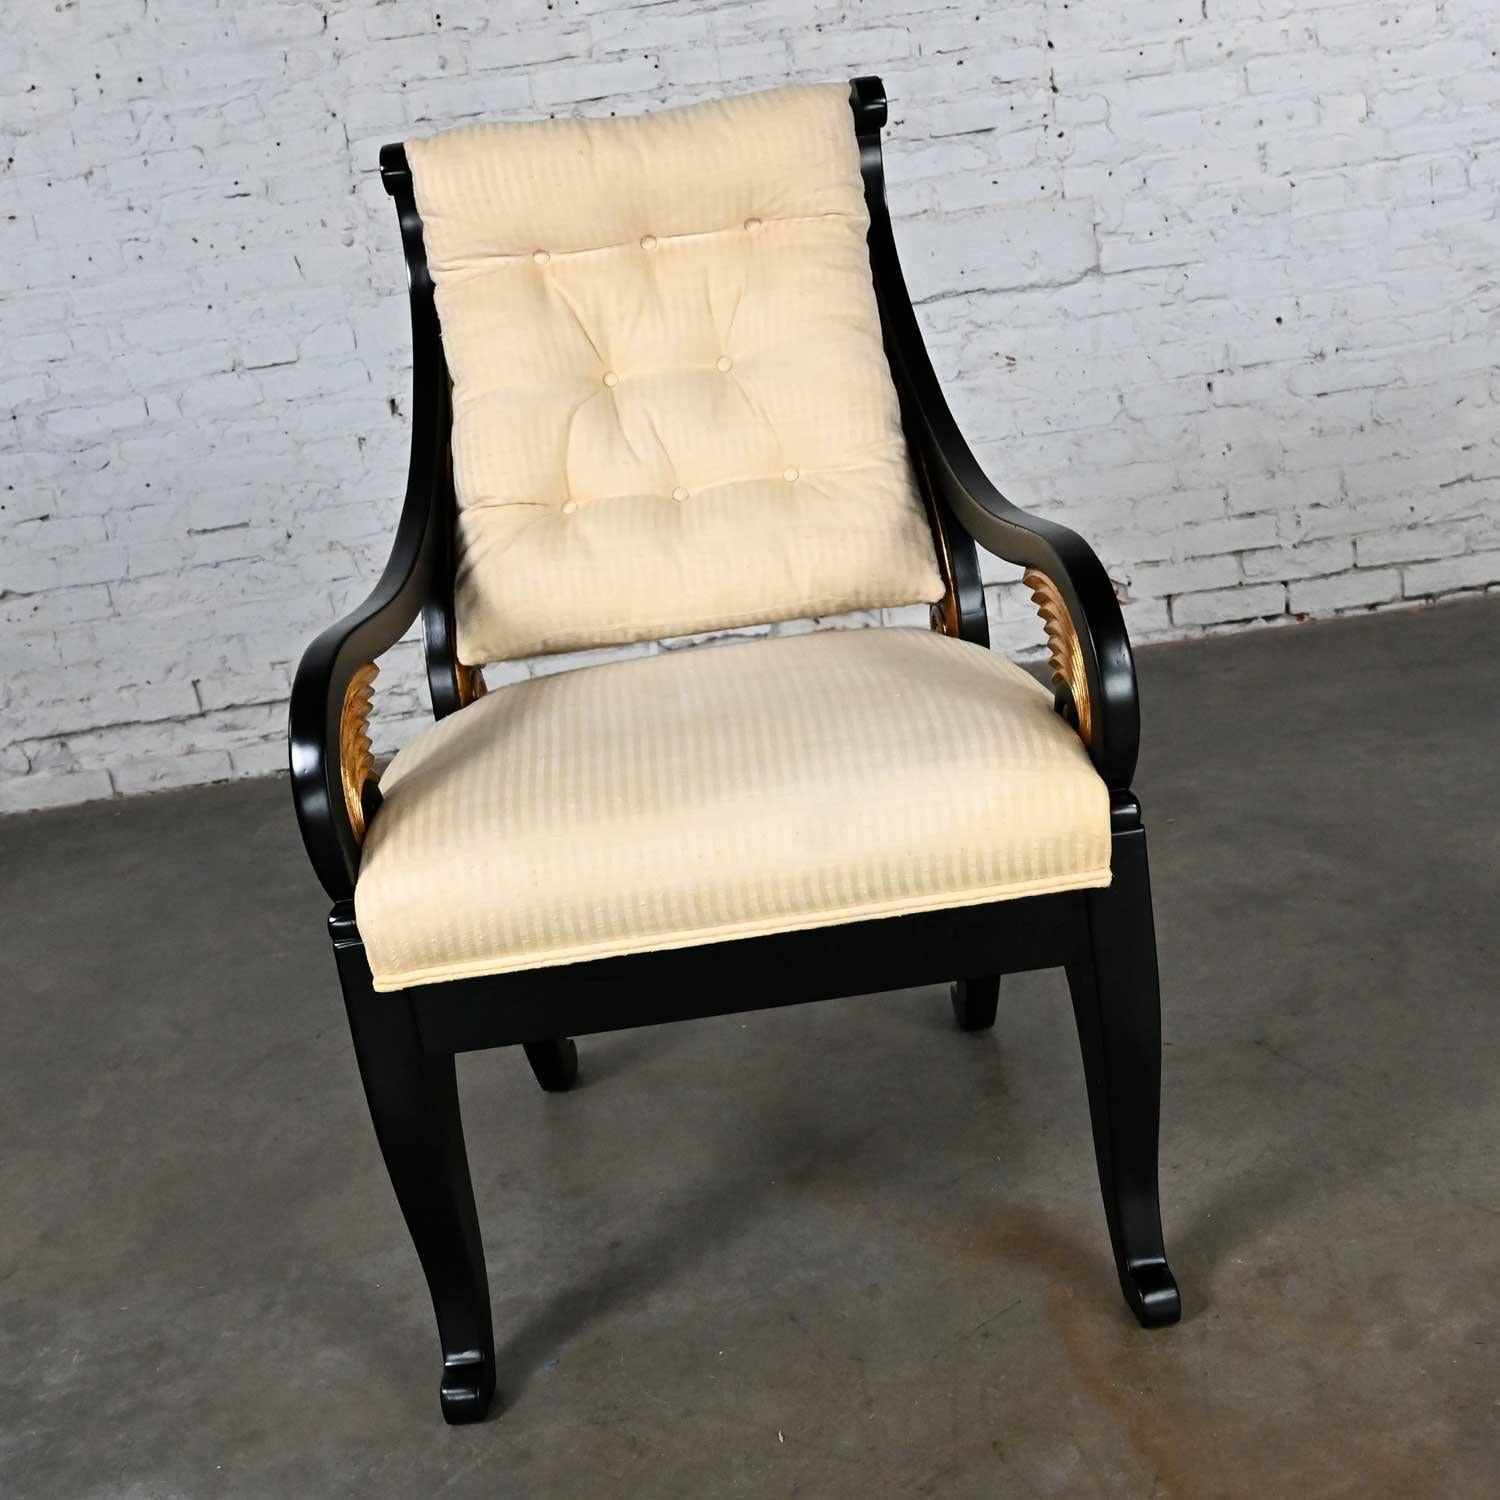 Unknown Late 20th Neoclassic Revival Black Side Chair Gilt Wing Accents Off-White Fabric For Sale